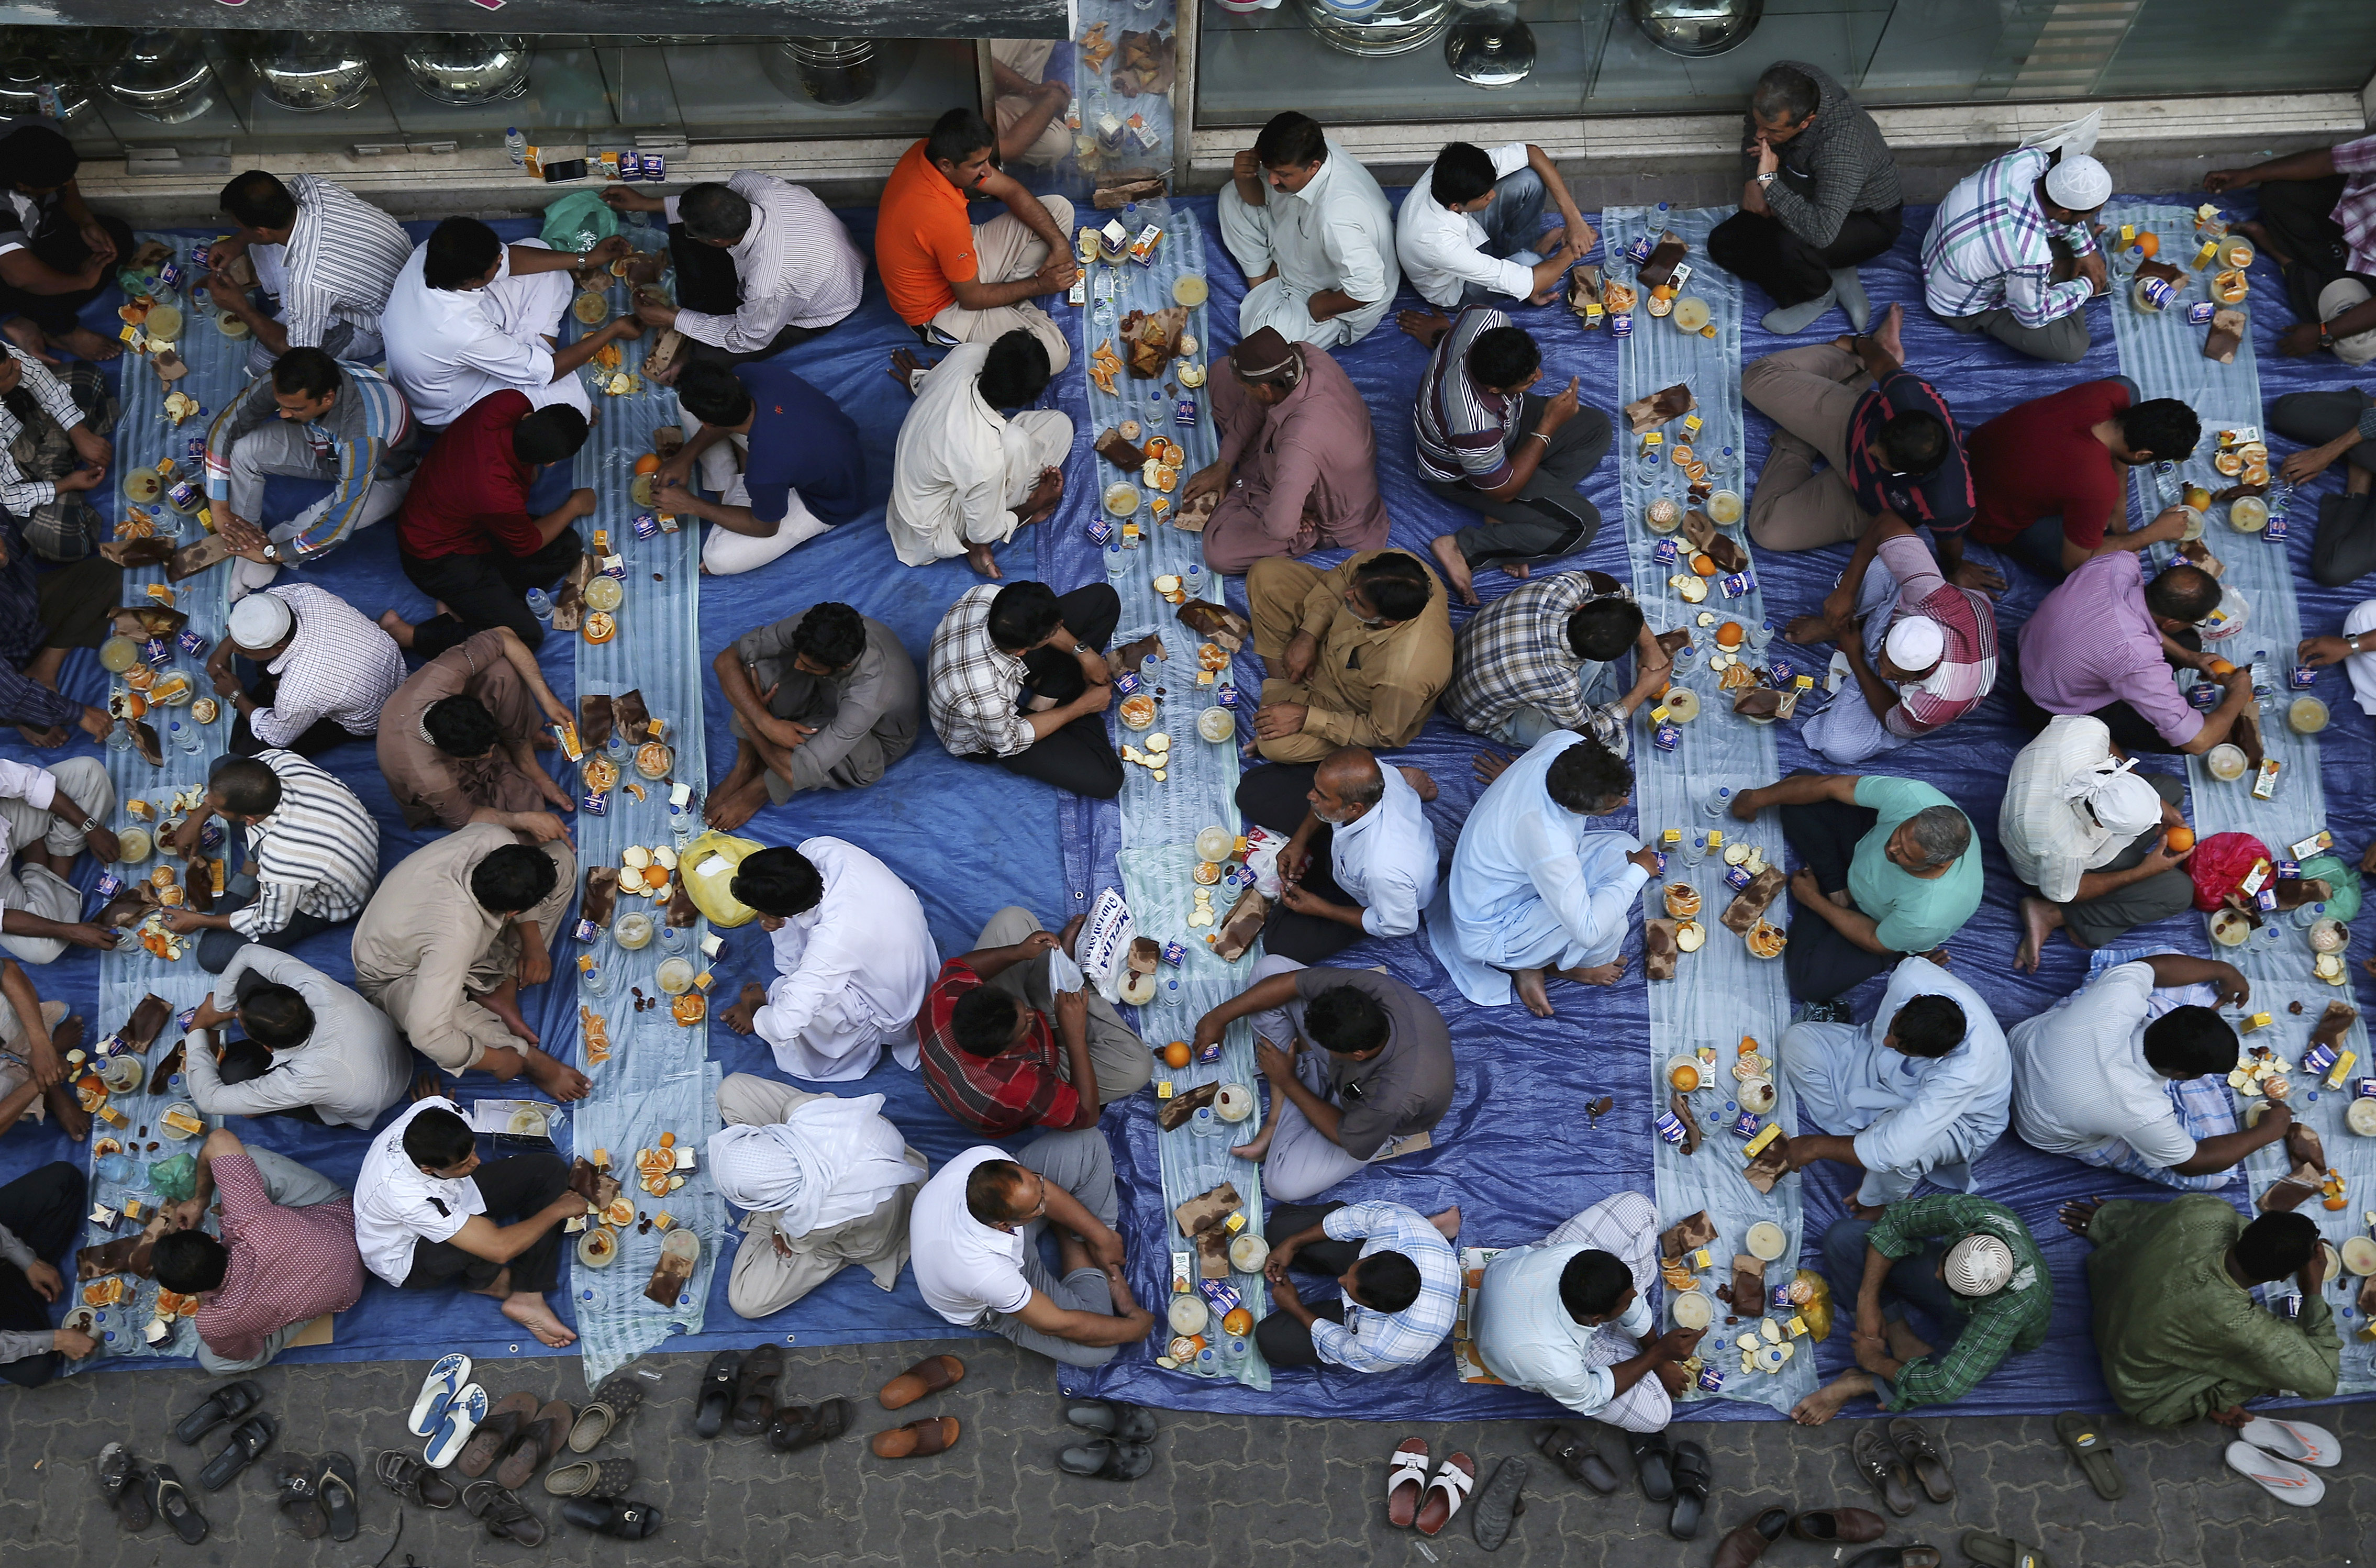 Muslims break their fast with iftar during the holy month of Ramadan at Lootha Mosque, Bur Dubai on July 1, 2014 in Dubai, United Arab Emirates. (Francois Nel—Getty Images)